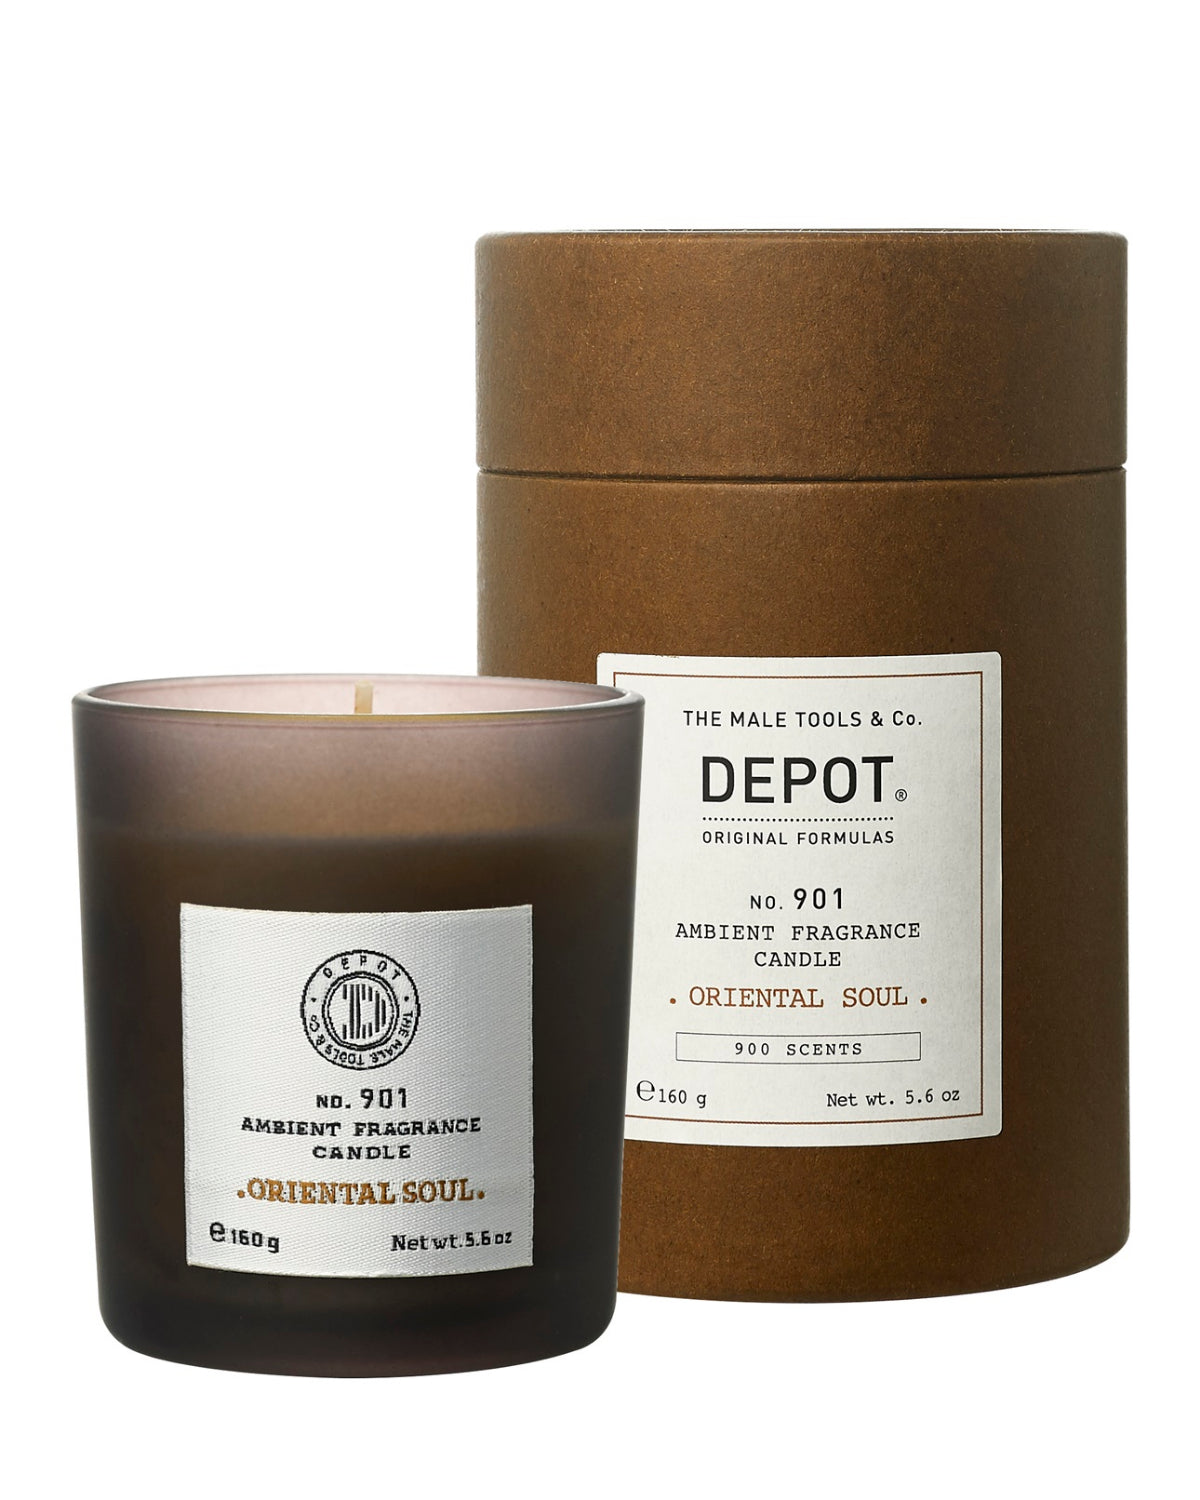 NO.901 AMBIENT FRAGRANCE CANDLE